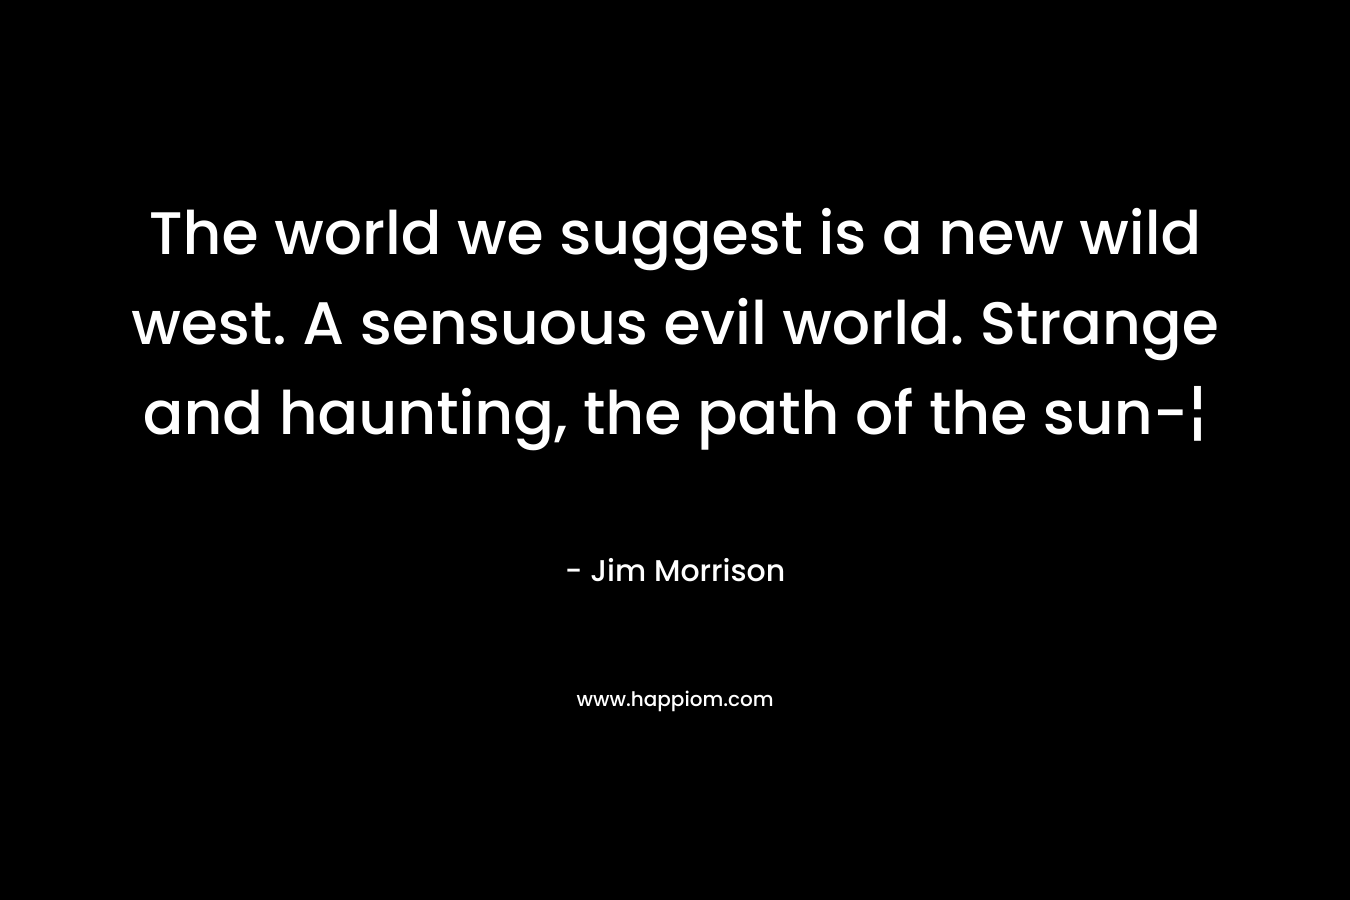 The world we suggest is a new wild west. A sensuous evil world. Strange and haunting, the path of the sun-¦